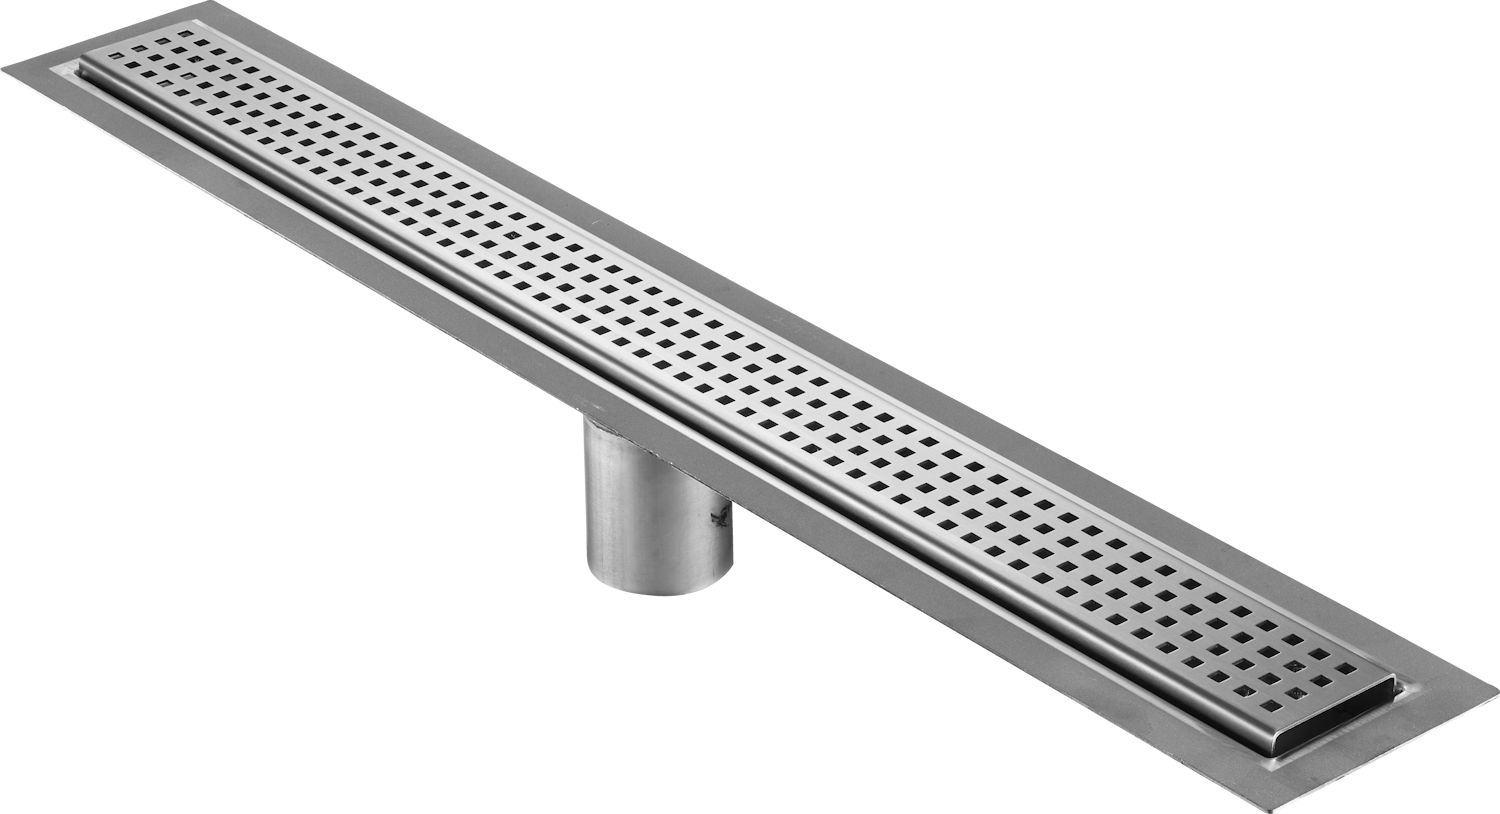 39 Inch Linear Drain Square Design Brushed Stainless Steel, Drains Unlimited